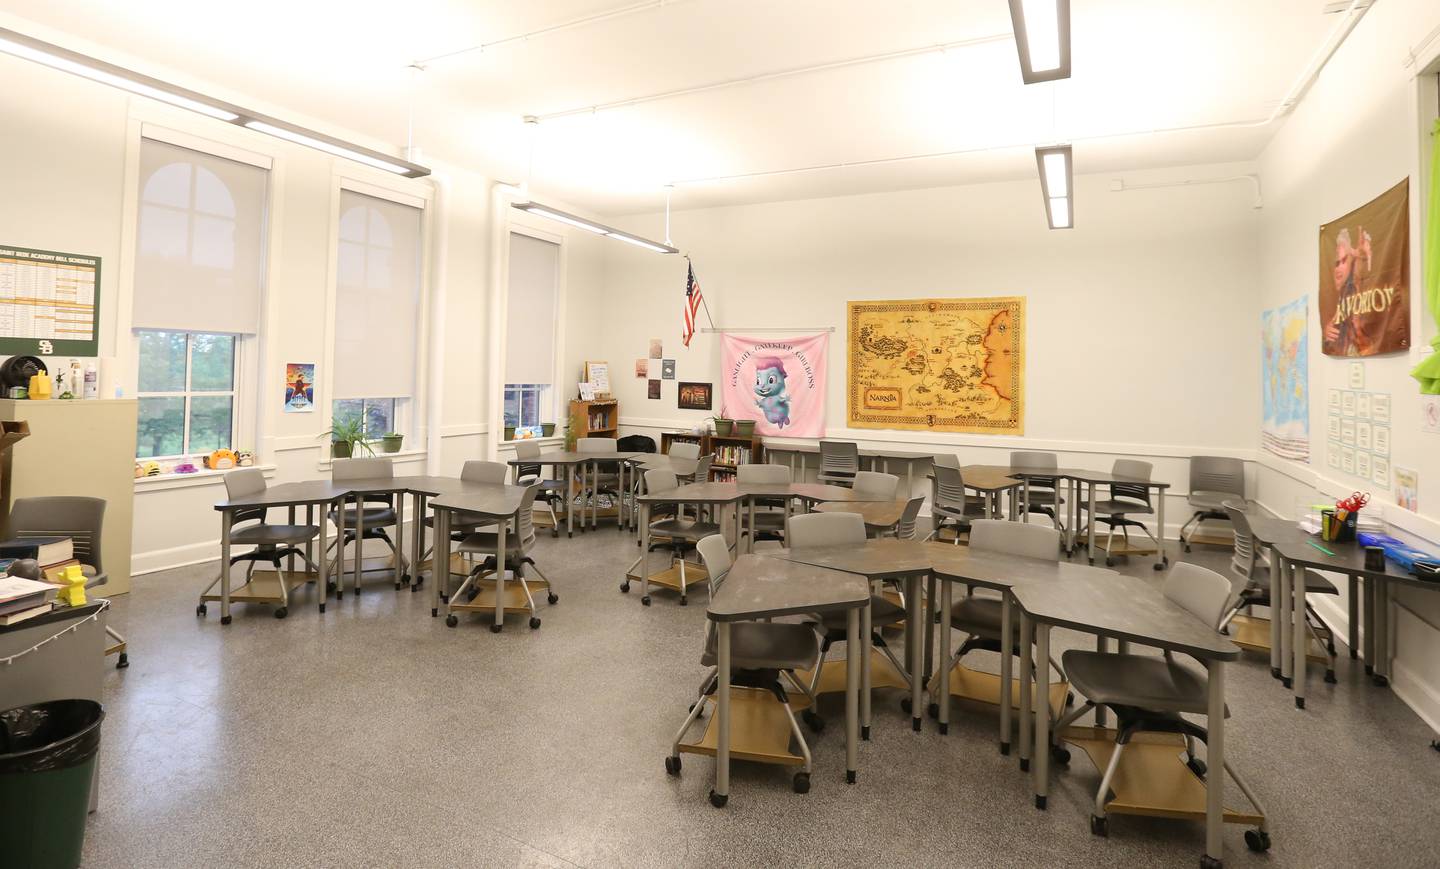 New windows, floors, desks and chairs have been added during a renovation on Friday, Oct. 6, 2023 at St. Bede Academy.